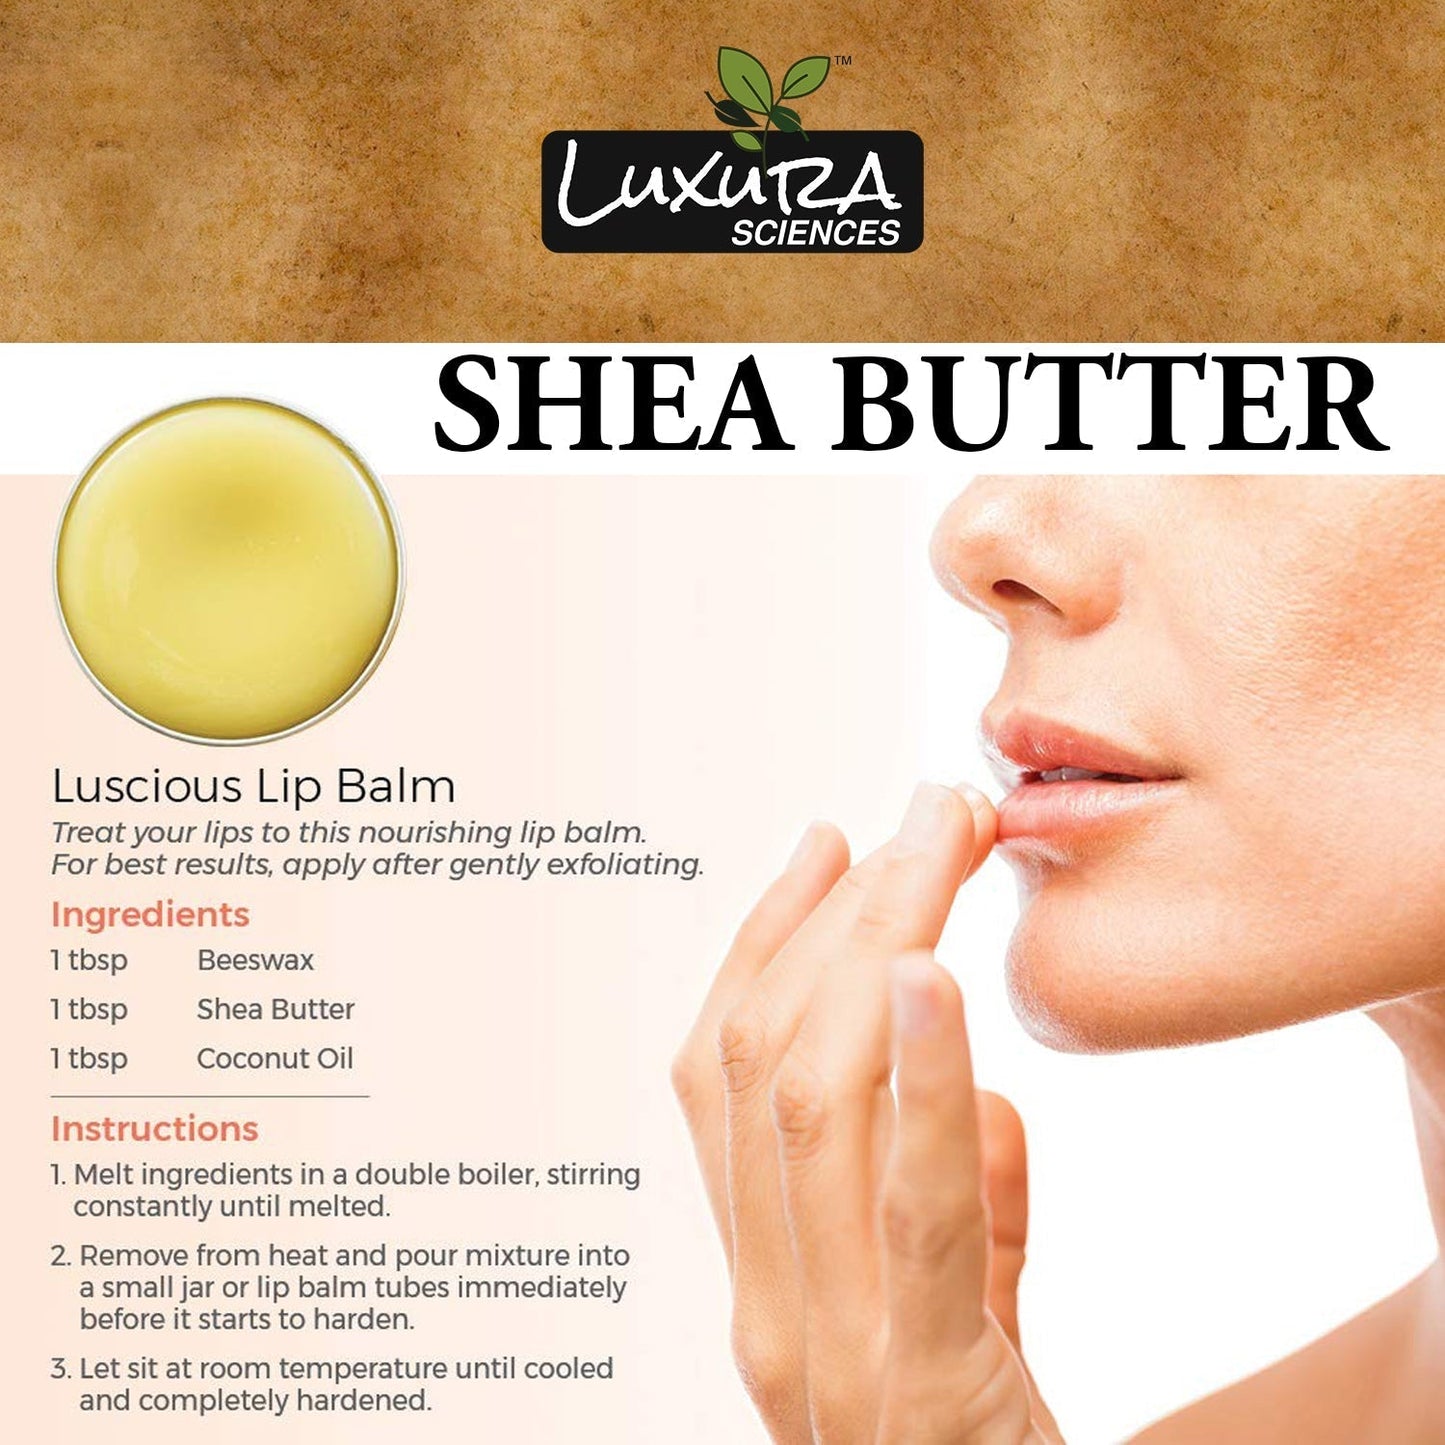 Luxura Sciences African Raw Shea Butter Unrefined Organic Ivory for Skin and Body